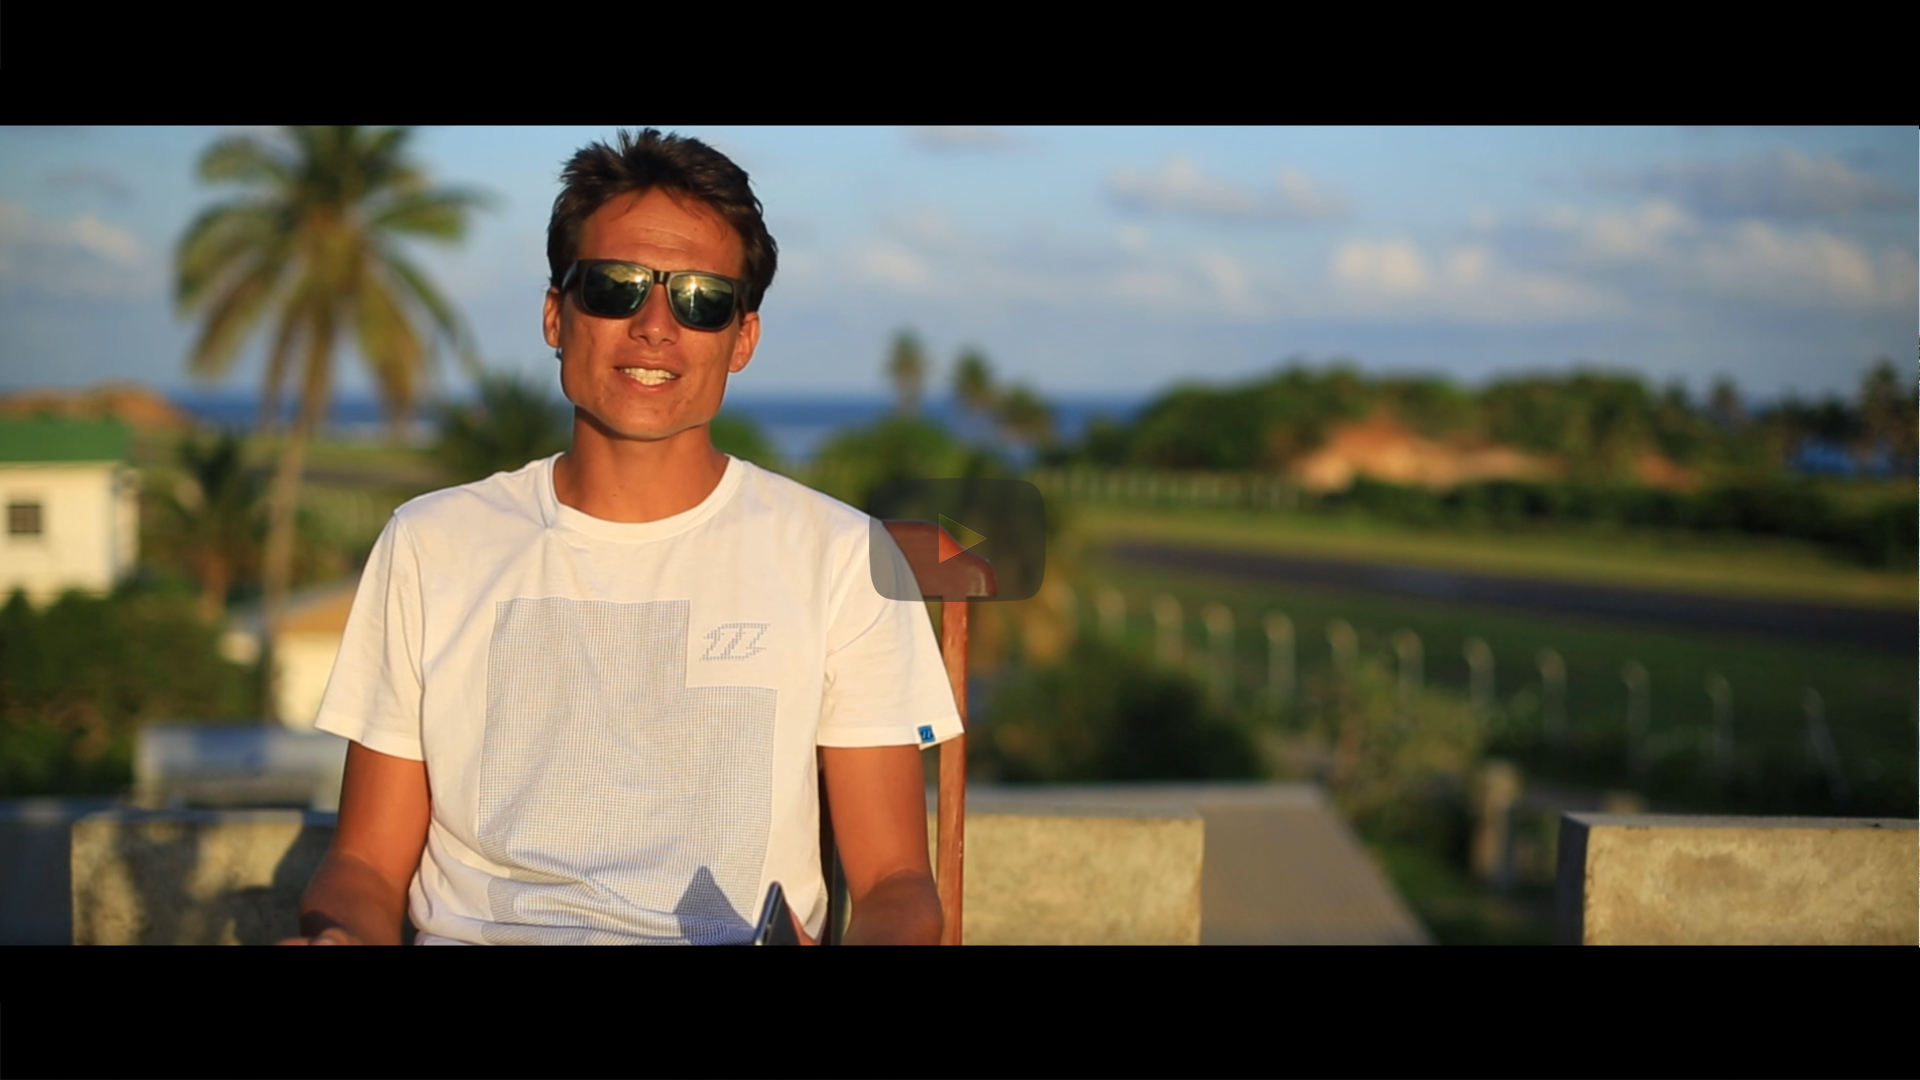 Learn How to Kiteboard with the Duotone kiteboarding Academy Videos at JT Pro Center